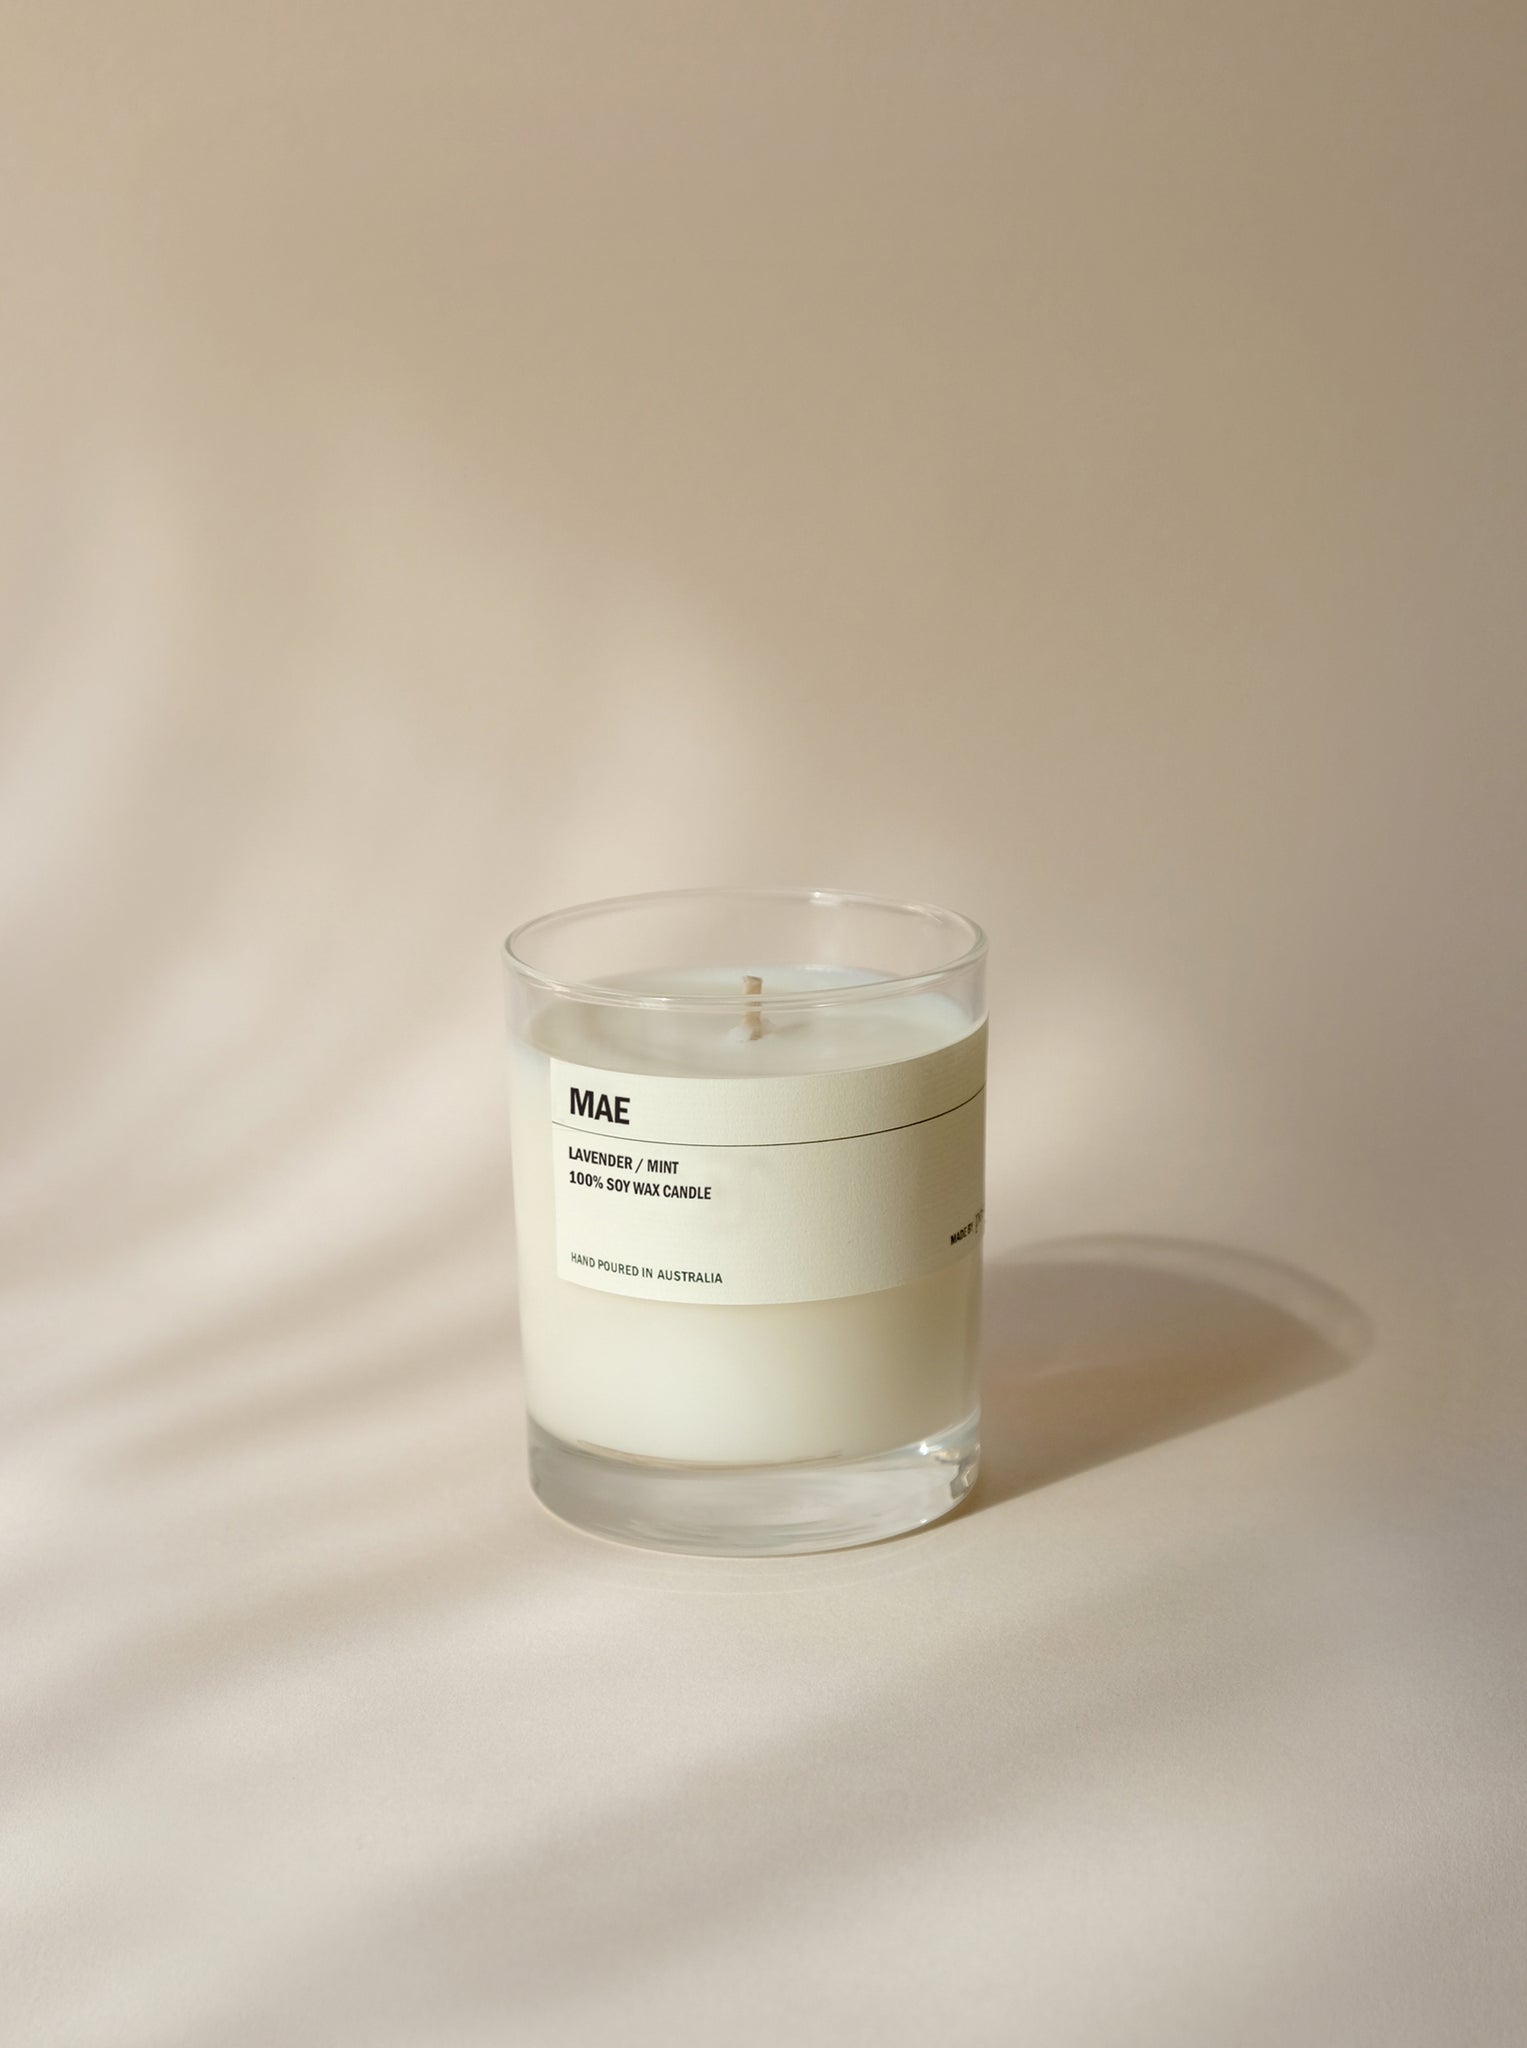 MAE: Lavender / Mint Clear Candle 300g